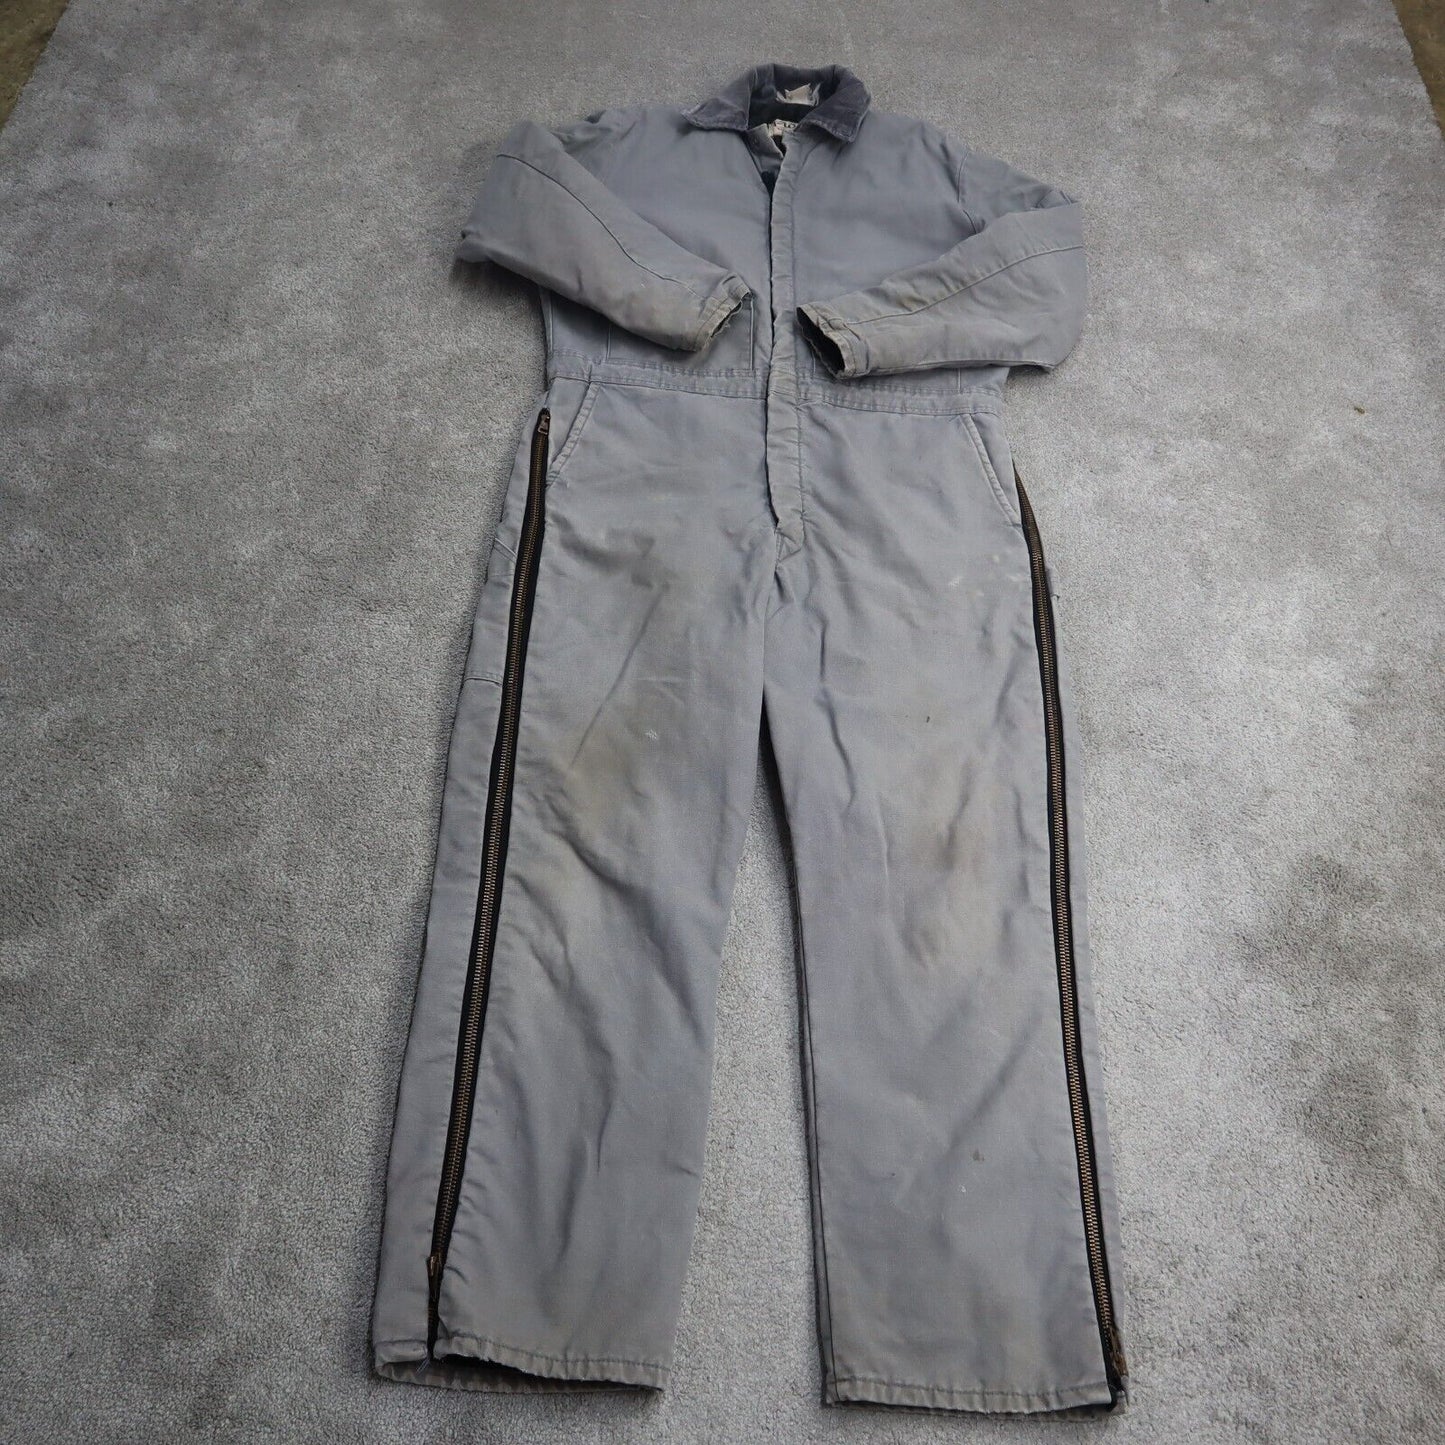 Walls Mens Insulated Coverall Jumpsuit Long Sleeve Side Zip Gray Size 42